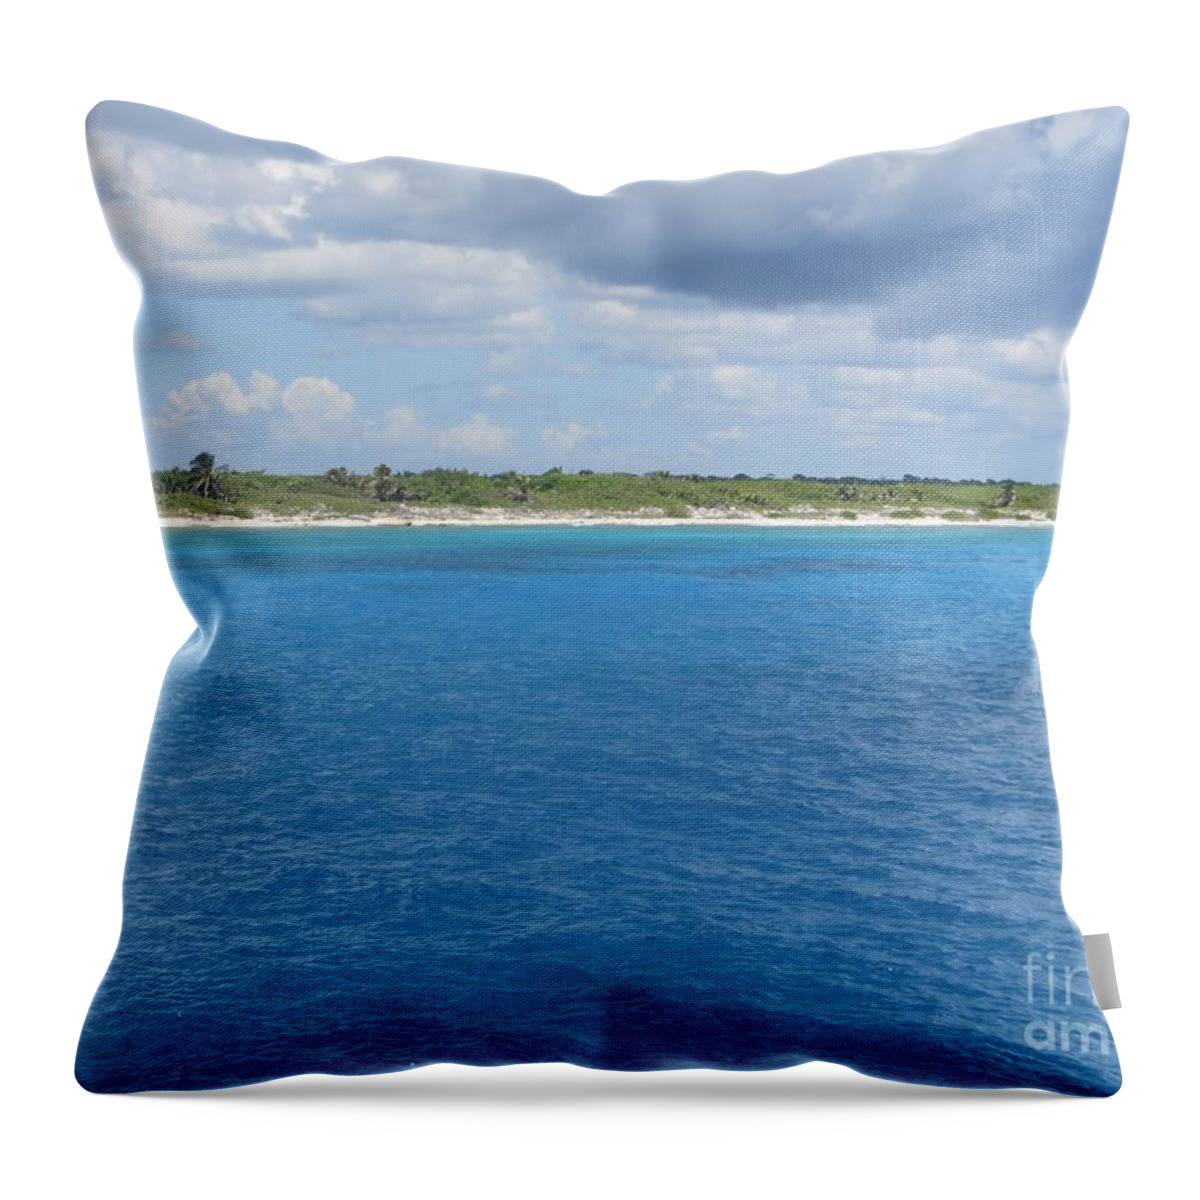 Just Let Your Imagination Go Throw Pillow featuring the photograph Just Let Your Imagination Go by Tim Townsend